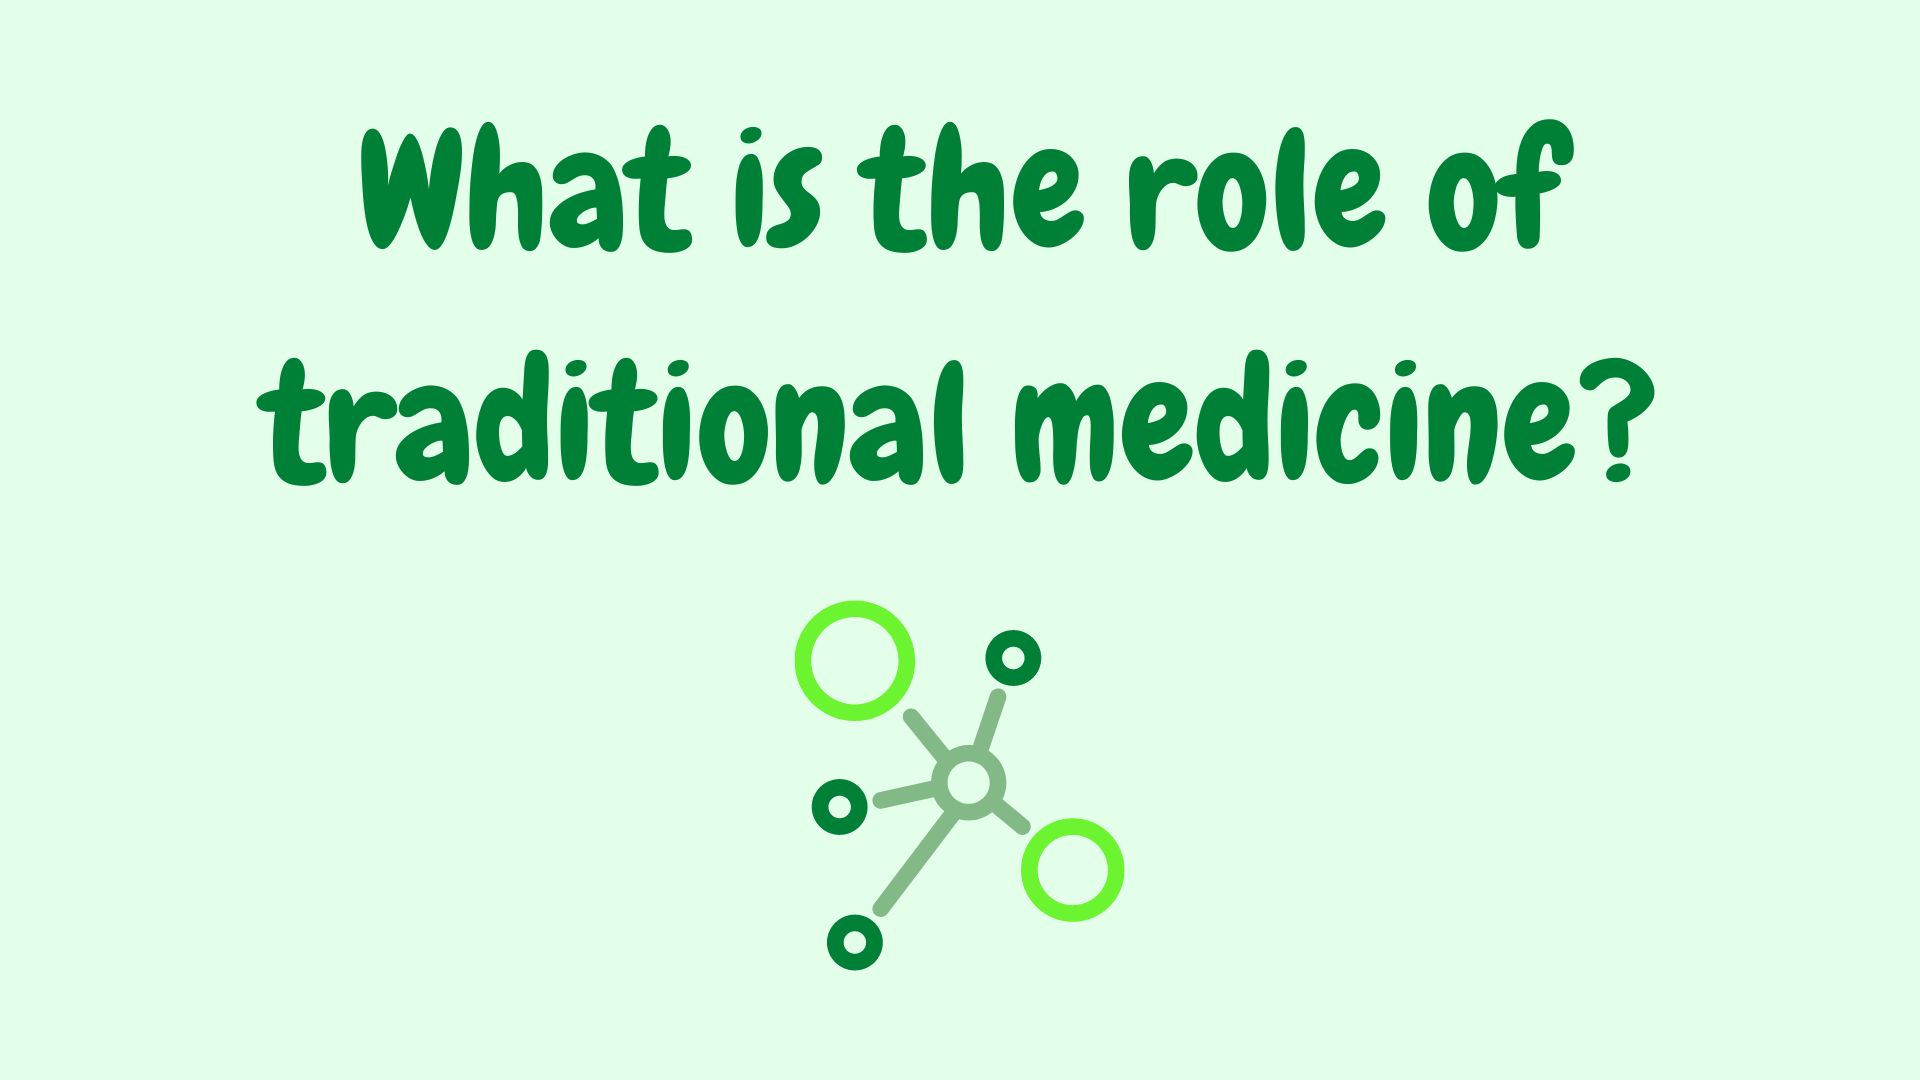 What is the role of traditional medicine?